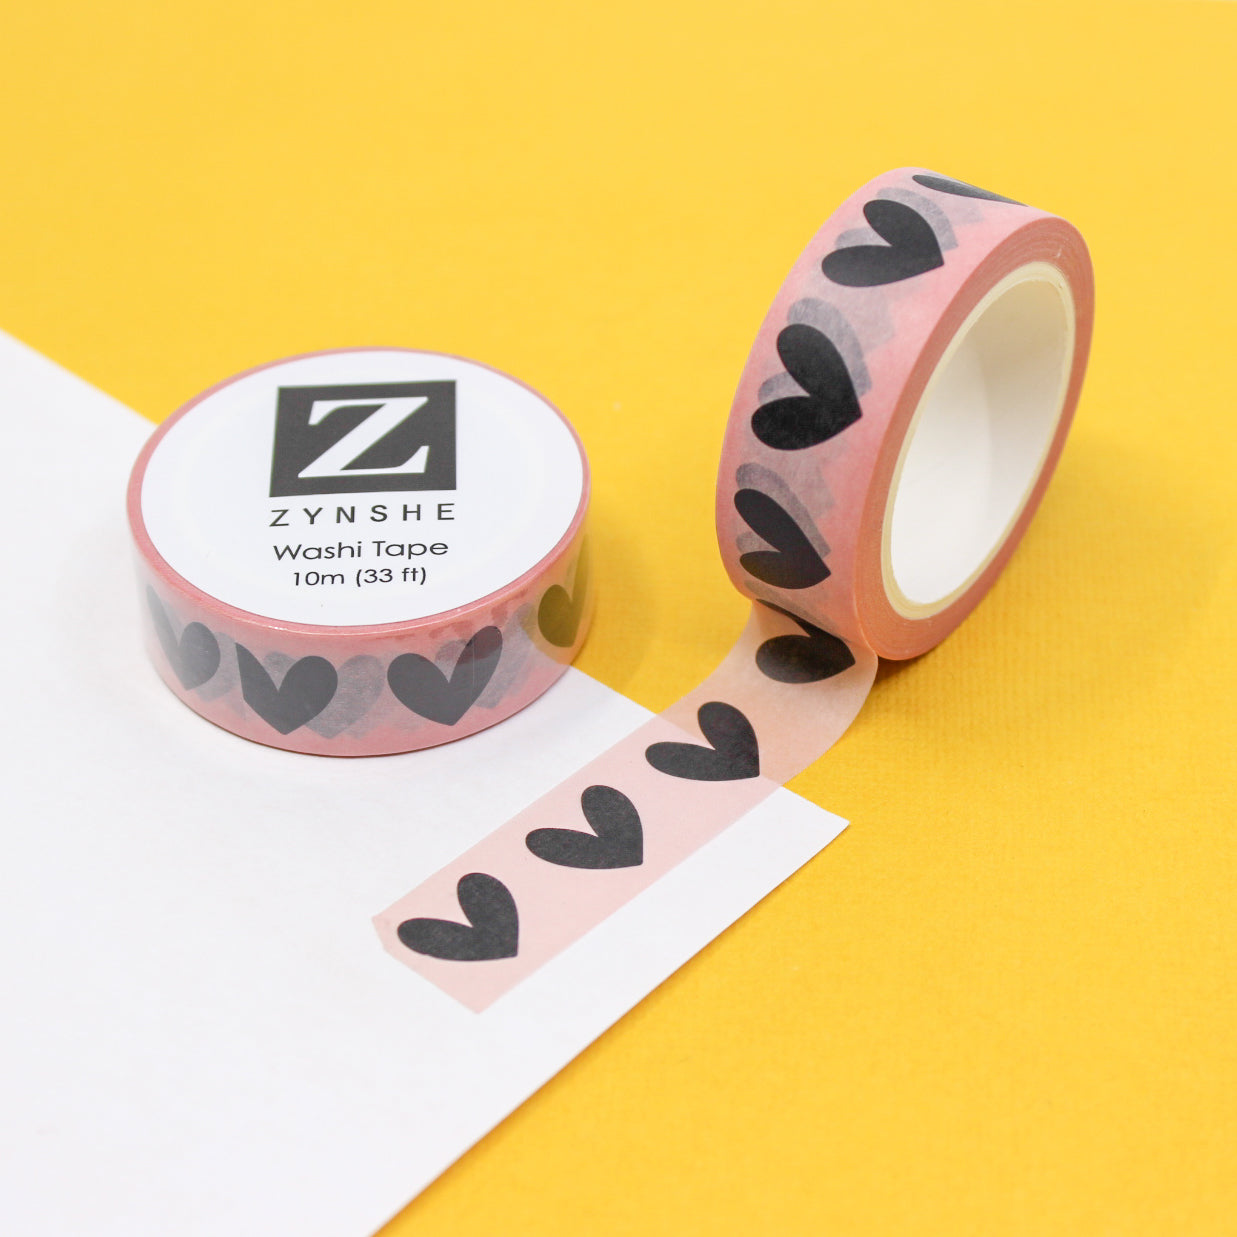 Adorn your planner or journal with our charming black hand-drawn heart washi tape on a vibrant pink backdrop, This tape is sold at BBB Supplies Craft Shop.